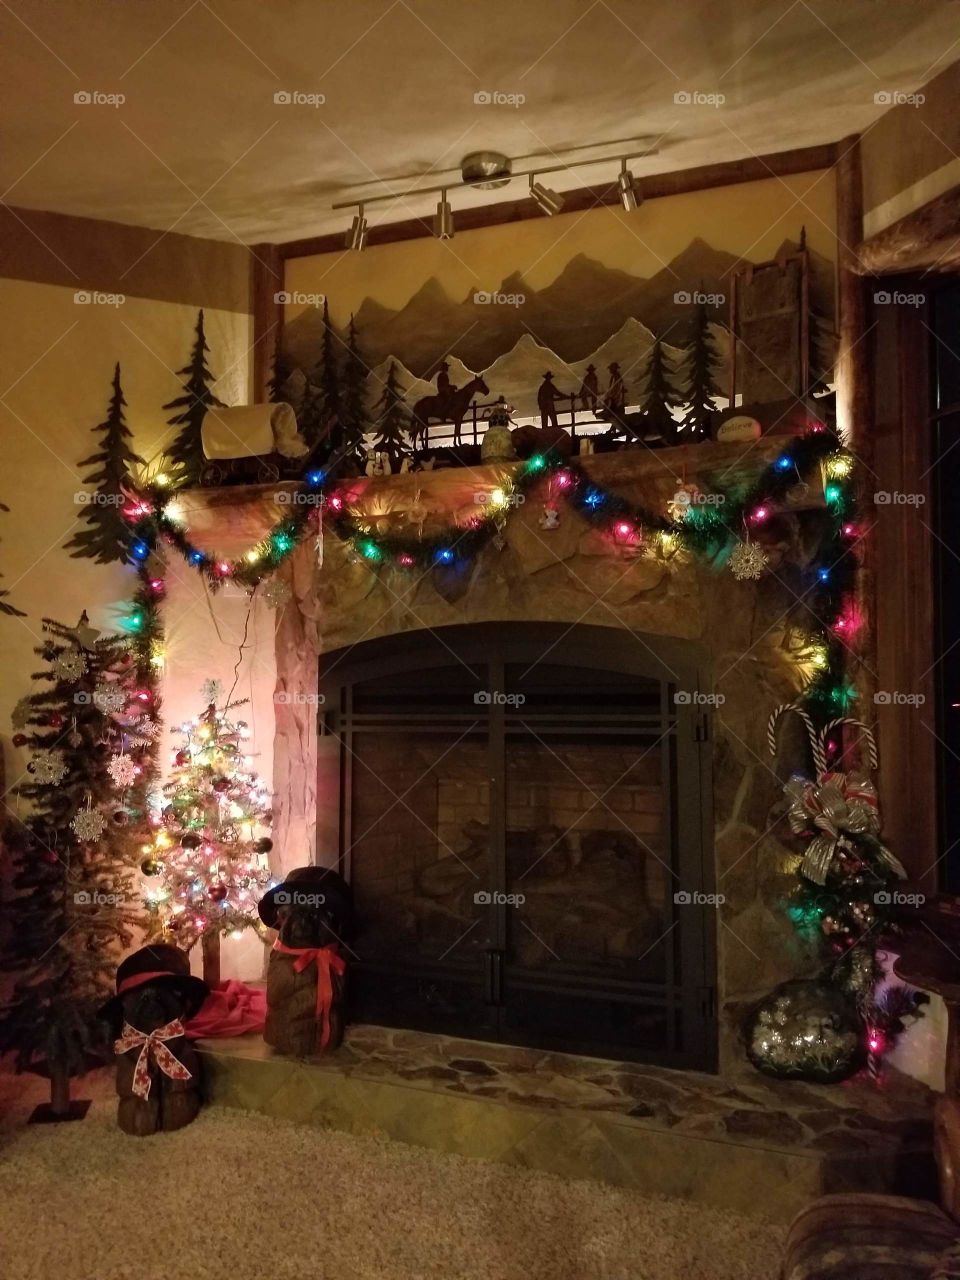 fireplace decorated for Christmas with garlands and lights, western theme